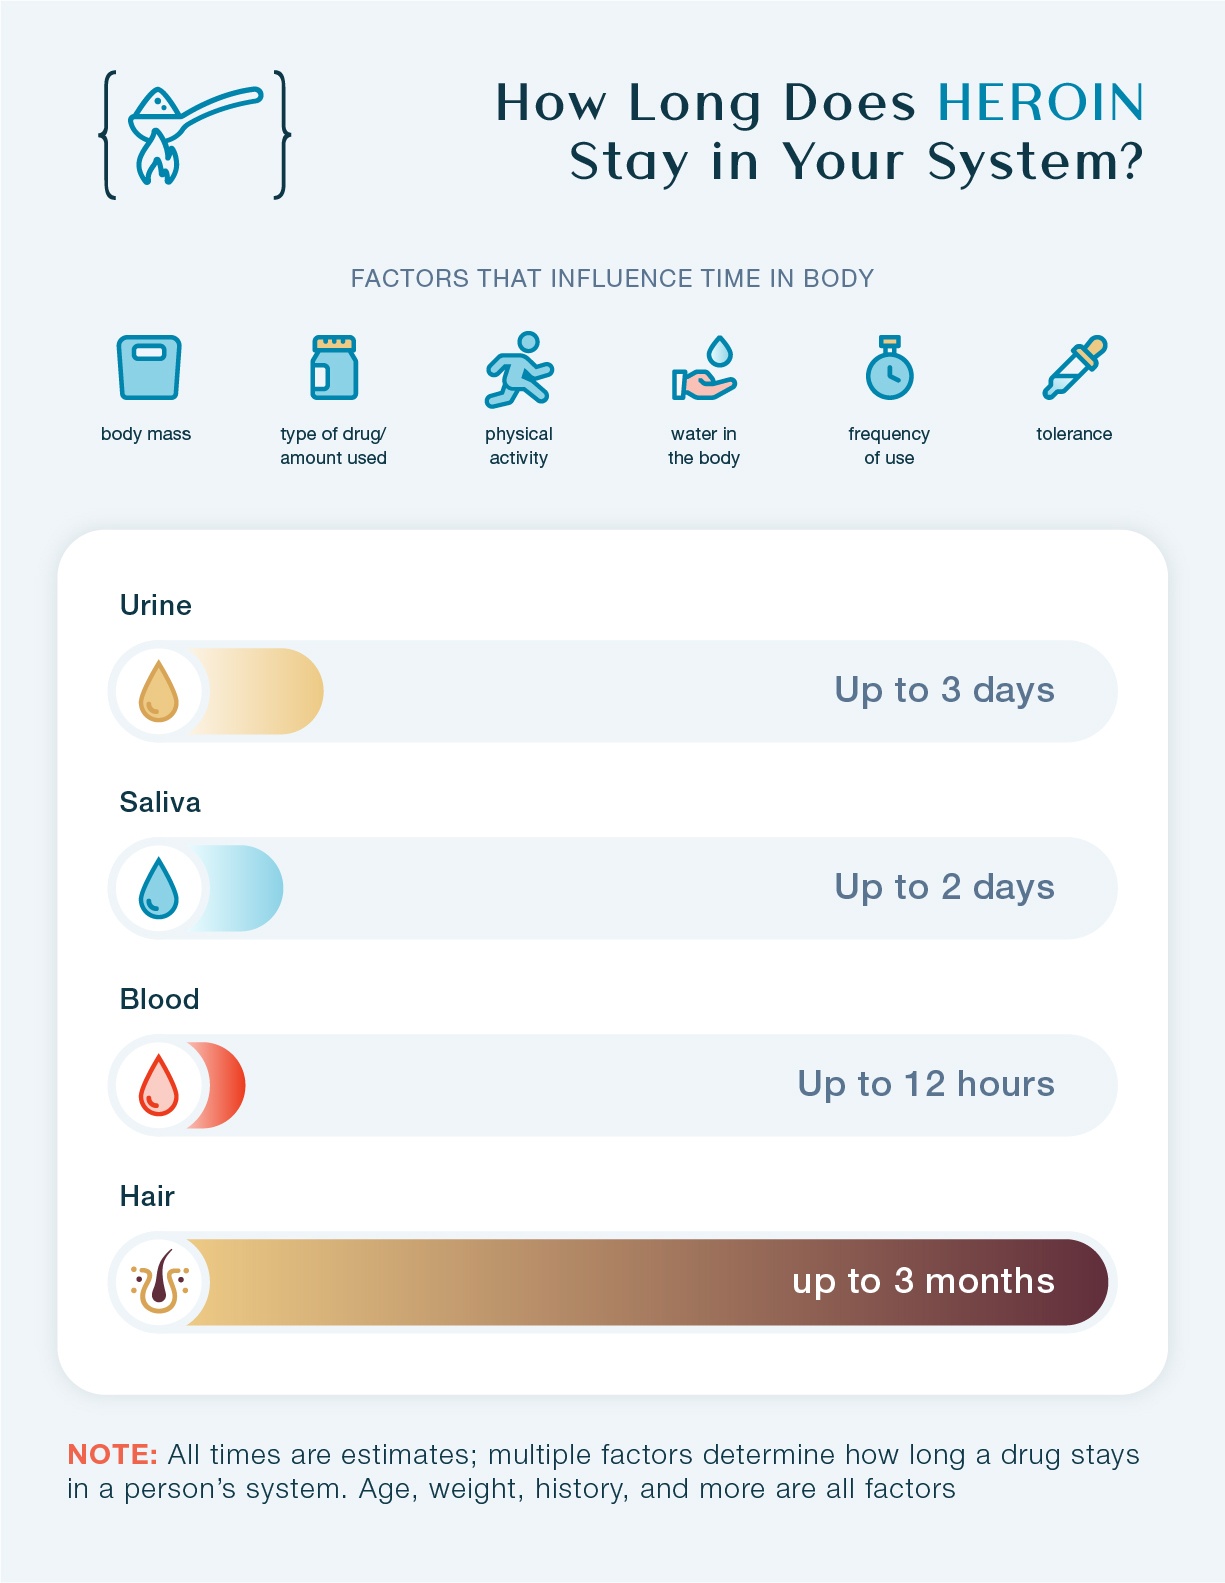 How long does Heroin stay in your system? This chart shows how long Heroin stays in urine, saliva, blood, and hair